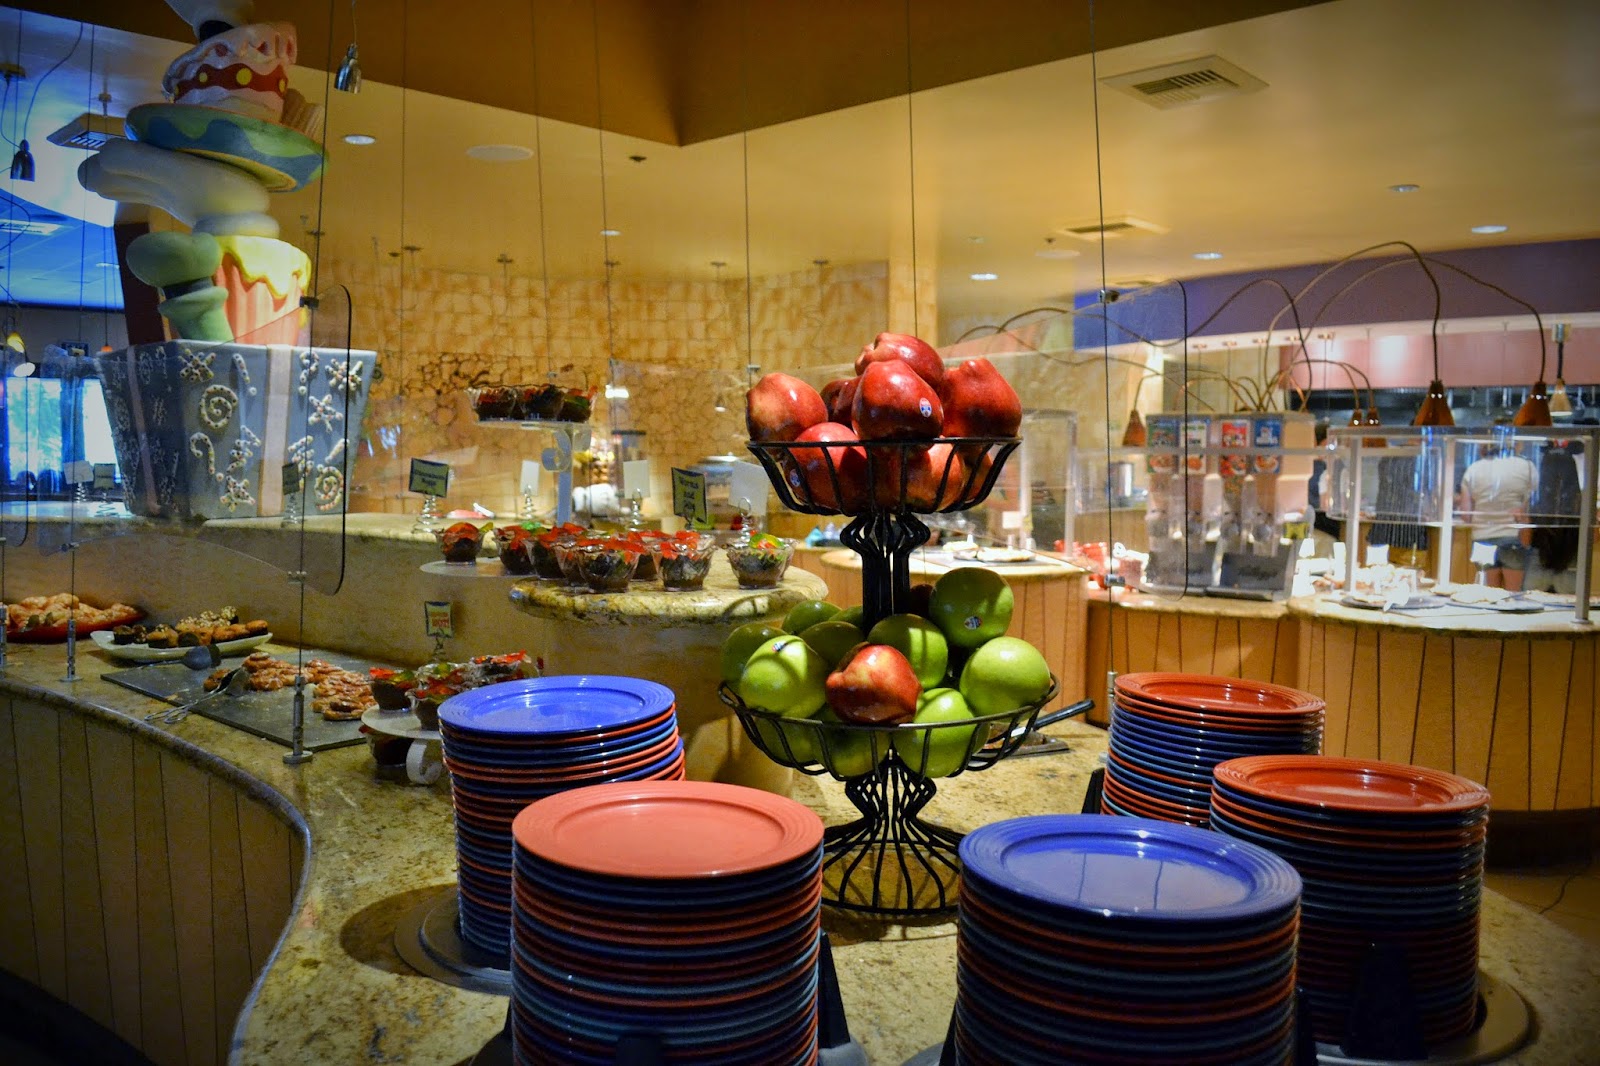 Do Tell, Anabel: Brunch at Goofy's Kitchen at the Disneyland Hotel